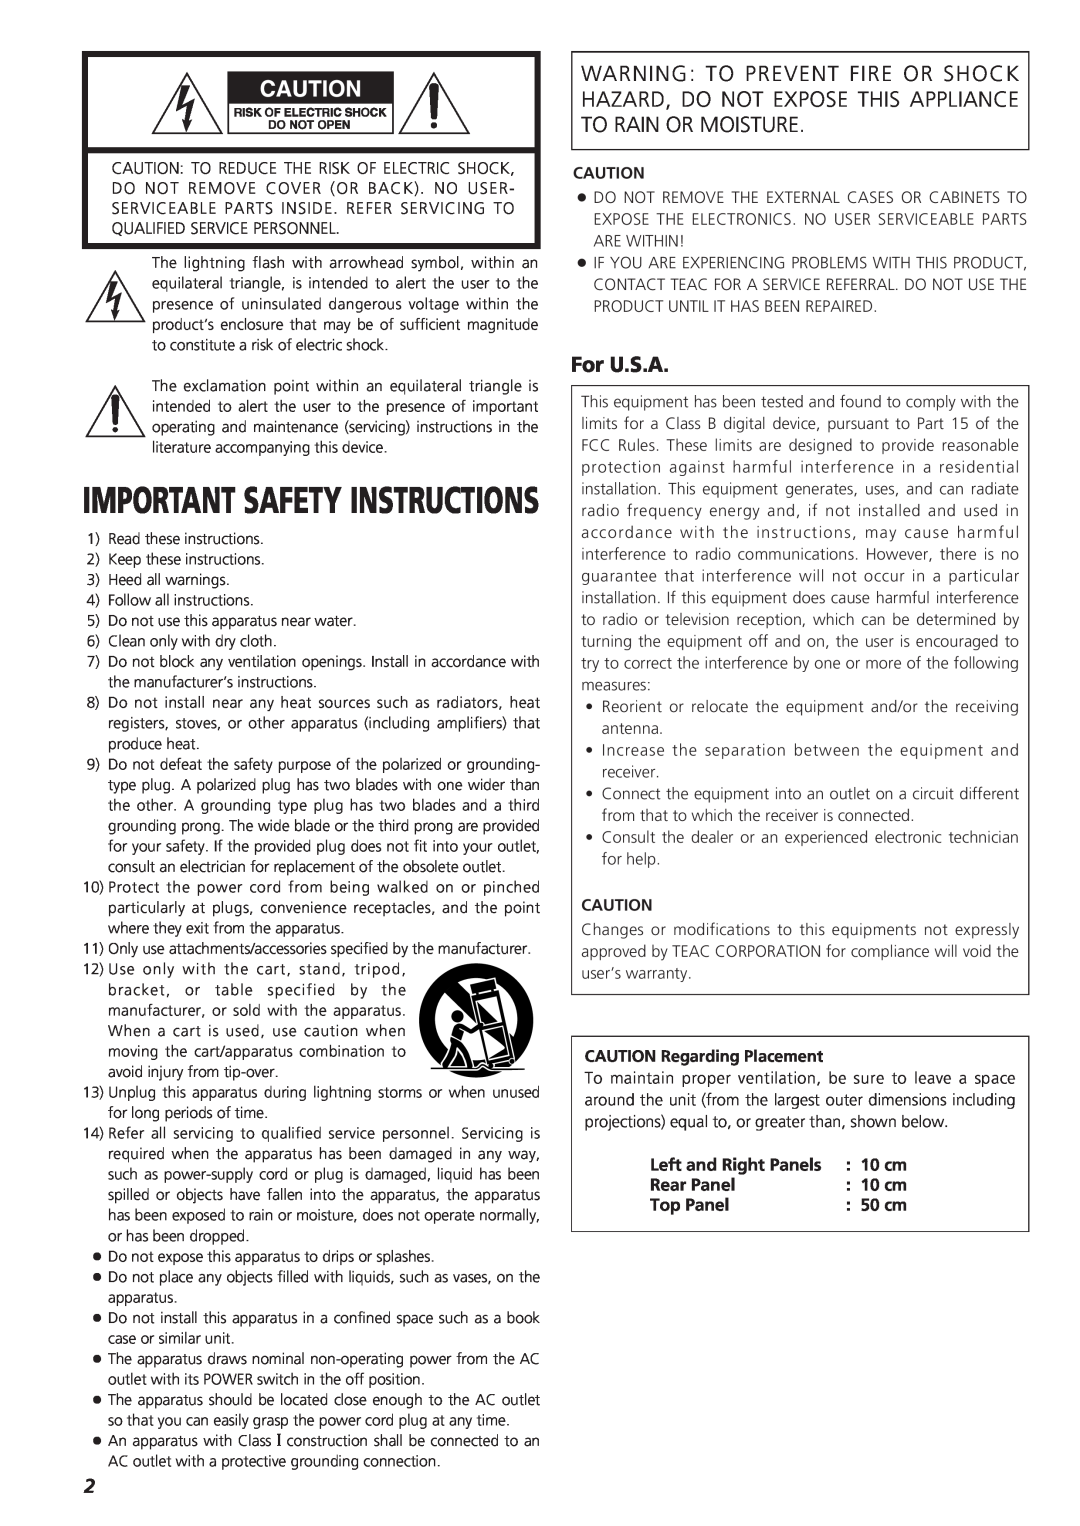 Teac AG-790 owner manual Important Safety Instructions, For U.S.A, 10 cm, Rear Panel, Top Panel 